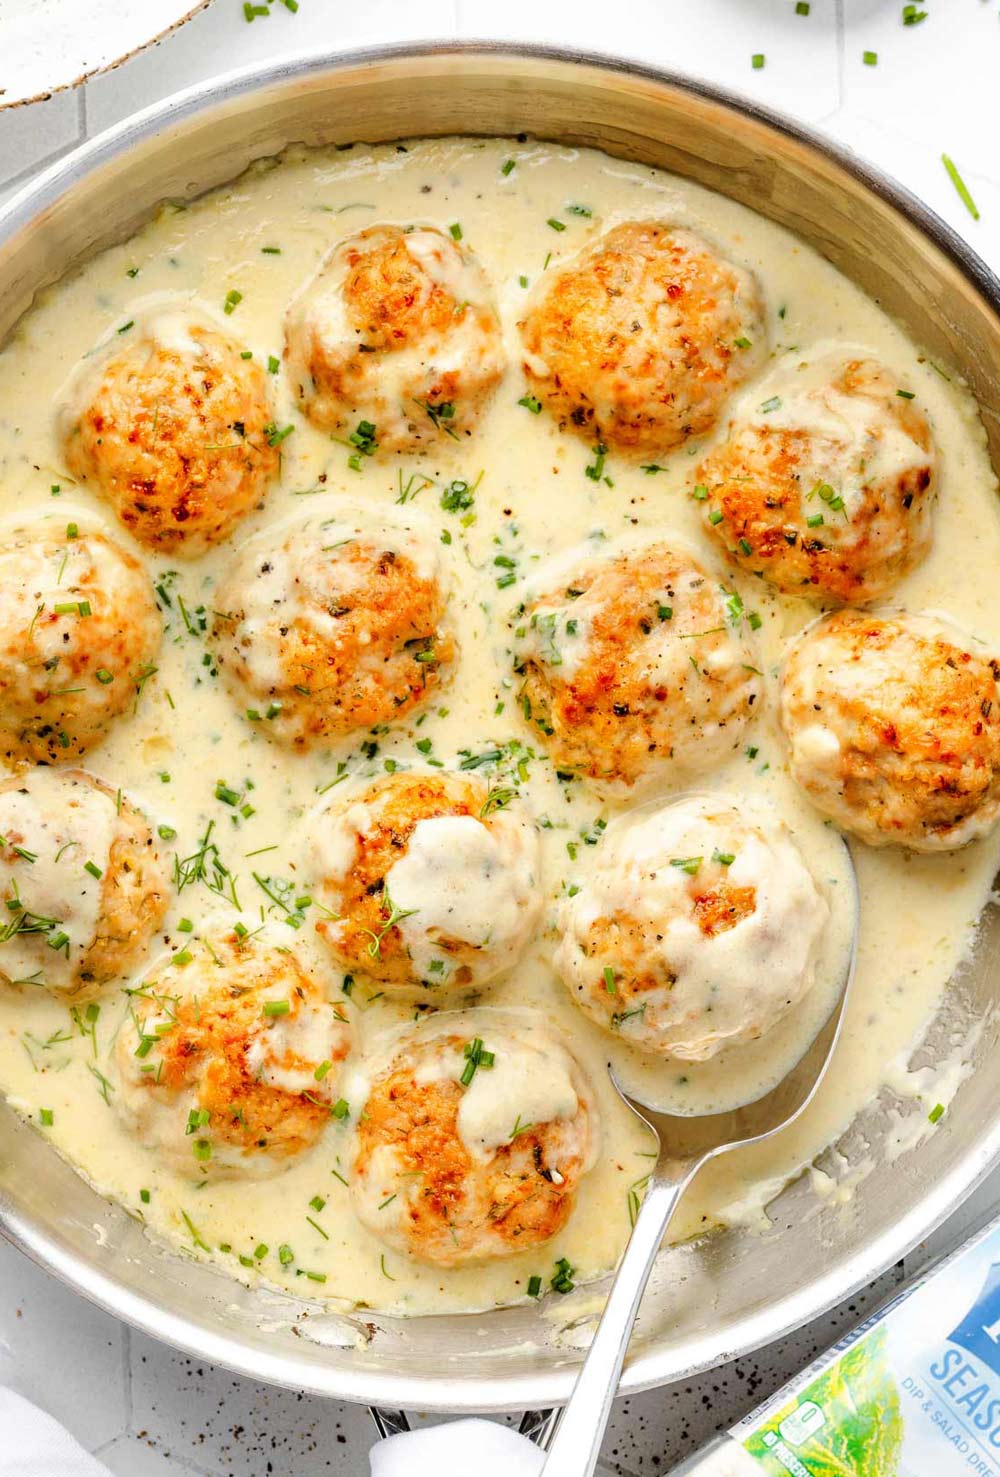 Overhead view of a skillet filled with baked ranch chicken meatballs covered in creamy ranch sauce.